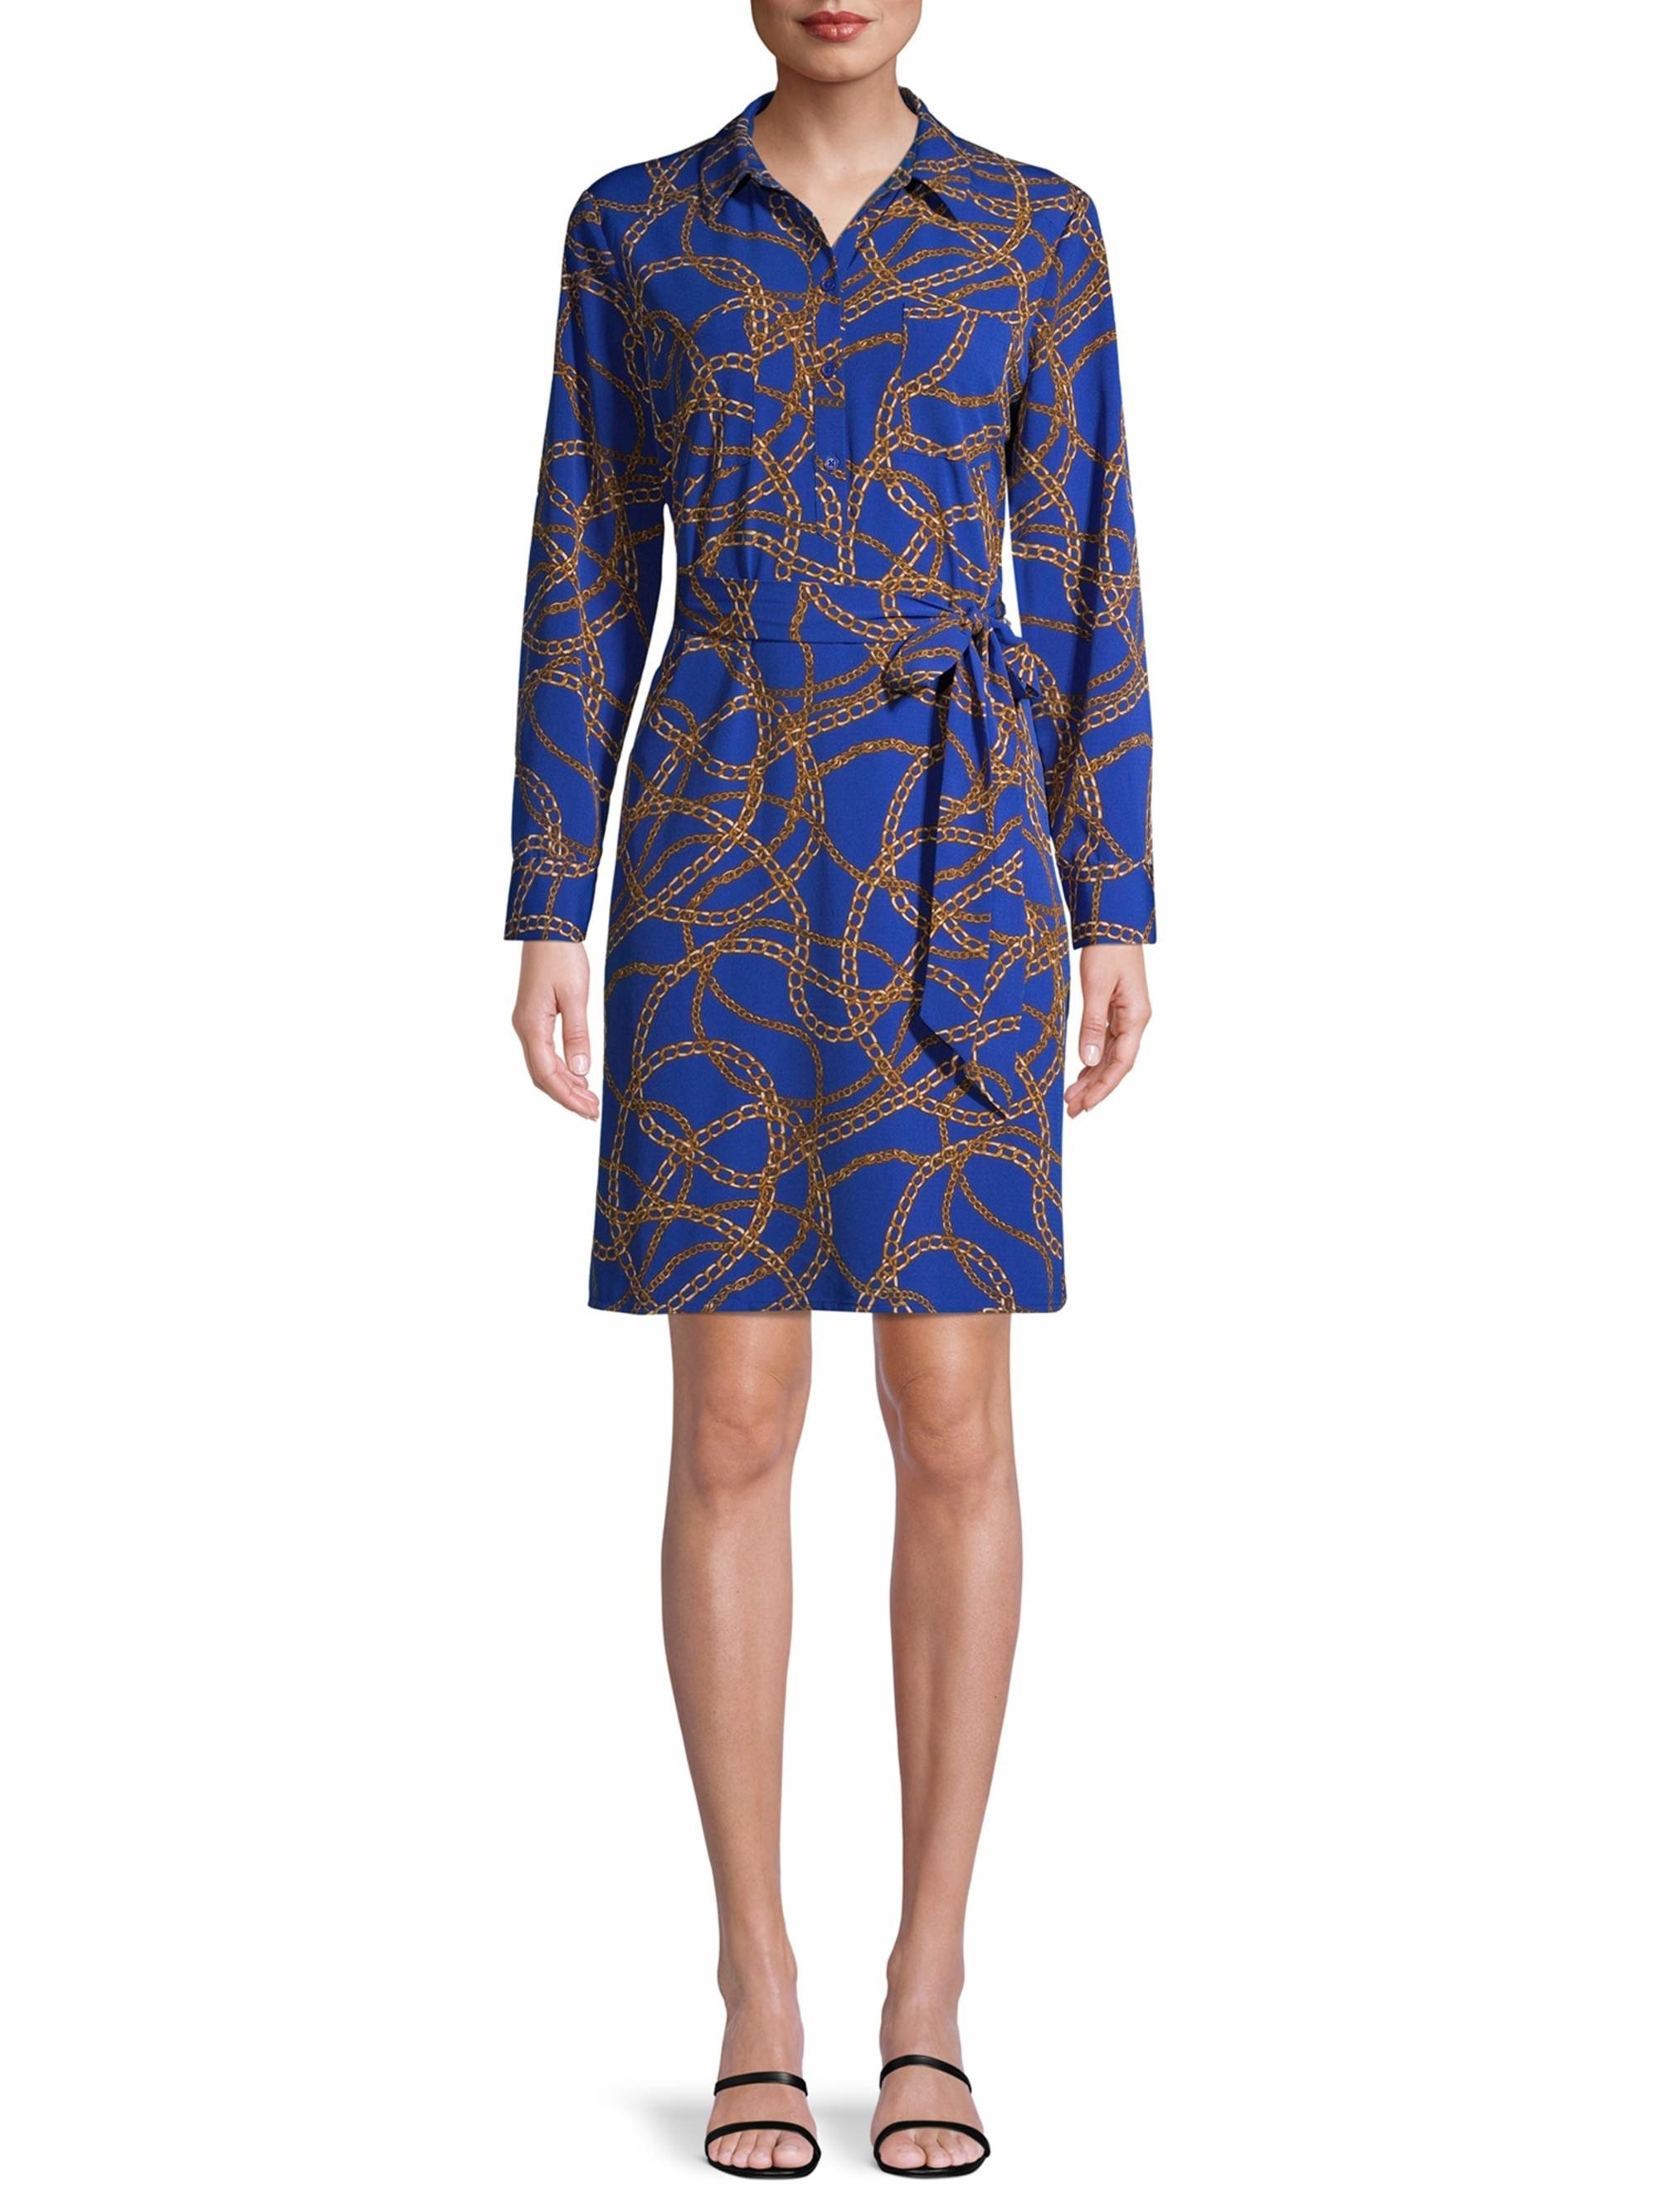  A model wearing the royal blue long-sleeve dress with a chain print design